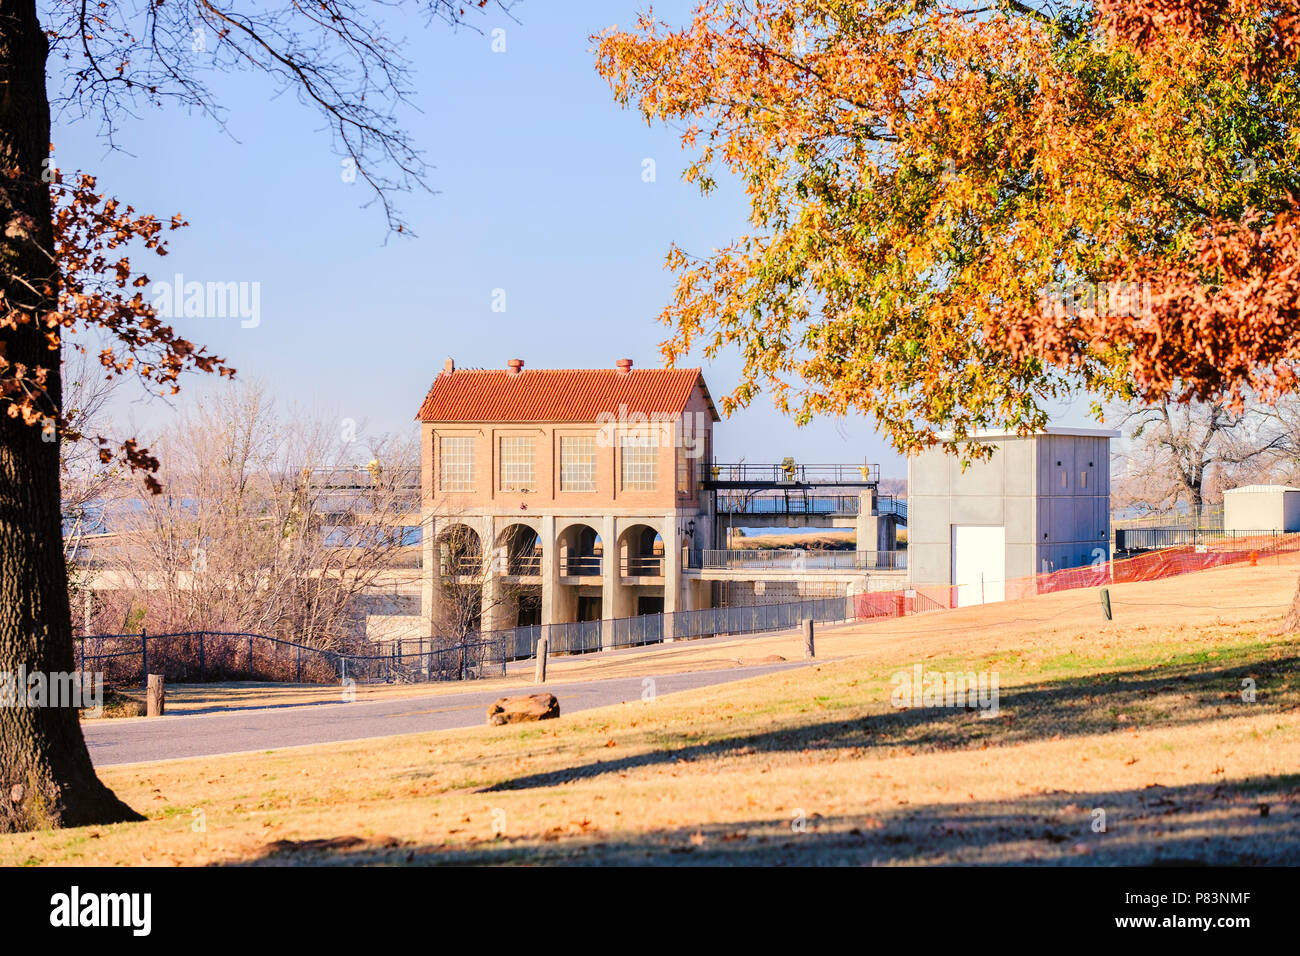 Overholser dam in Autumn with a colorful pin oak in foreground. Oklahoma City, Oklahoma, USA. Stock Photo